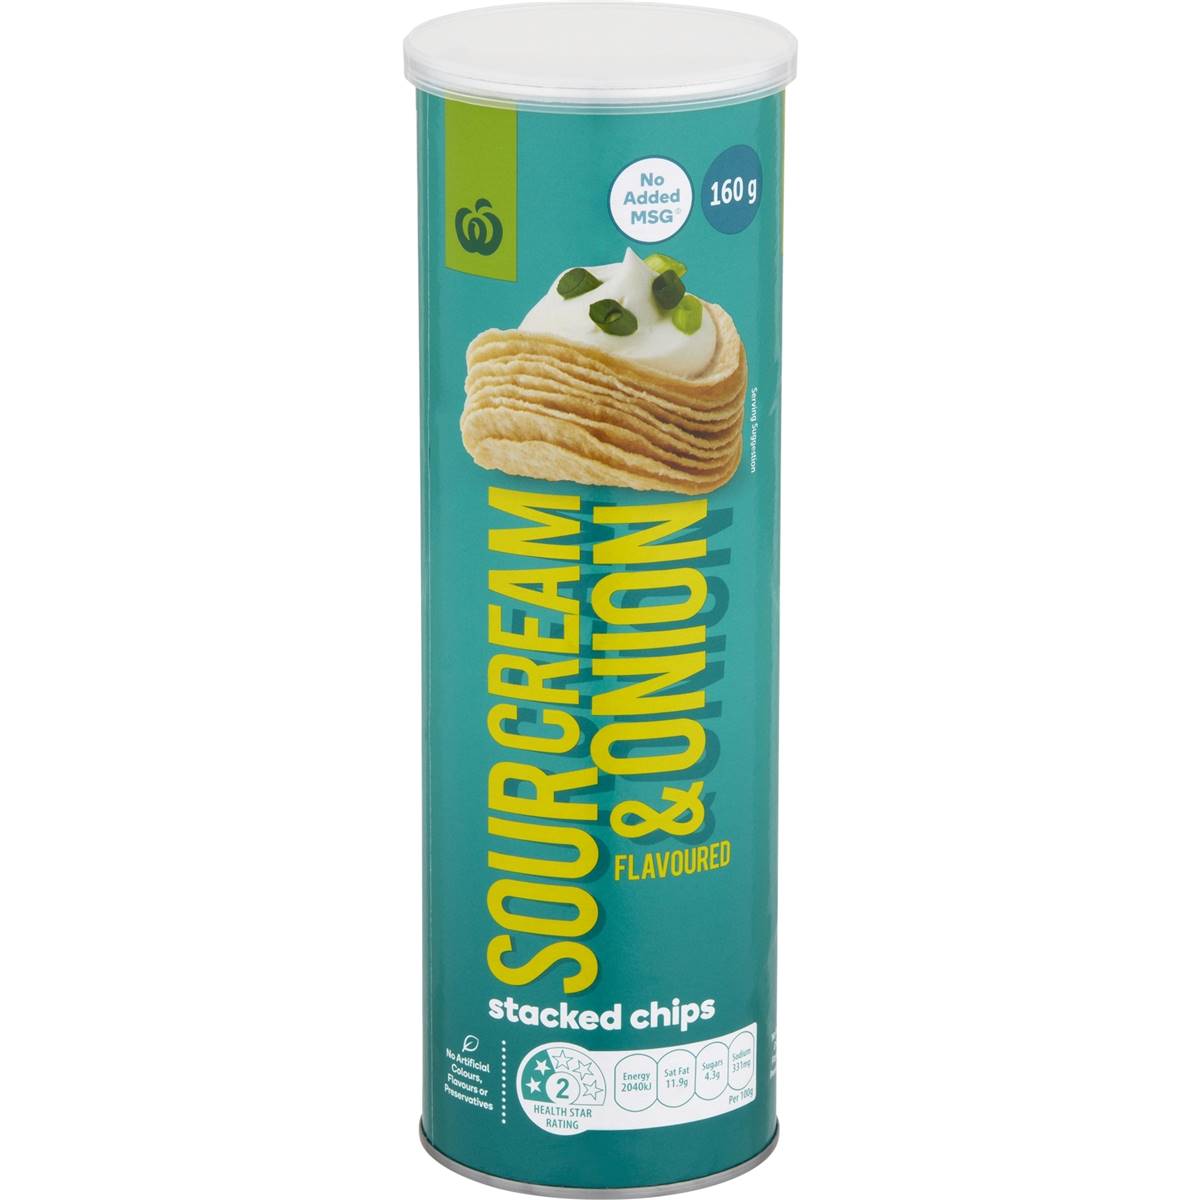 Woolworths Sour Cream & Onion Stacked Chips